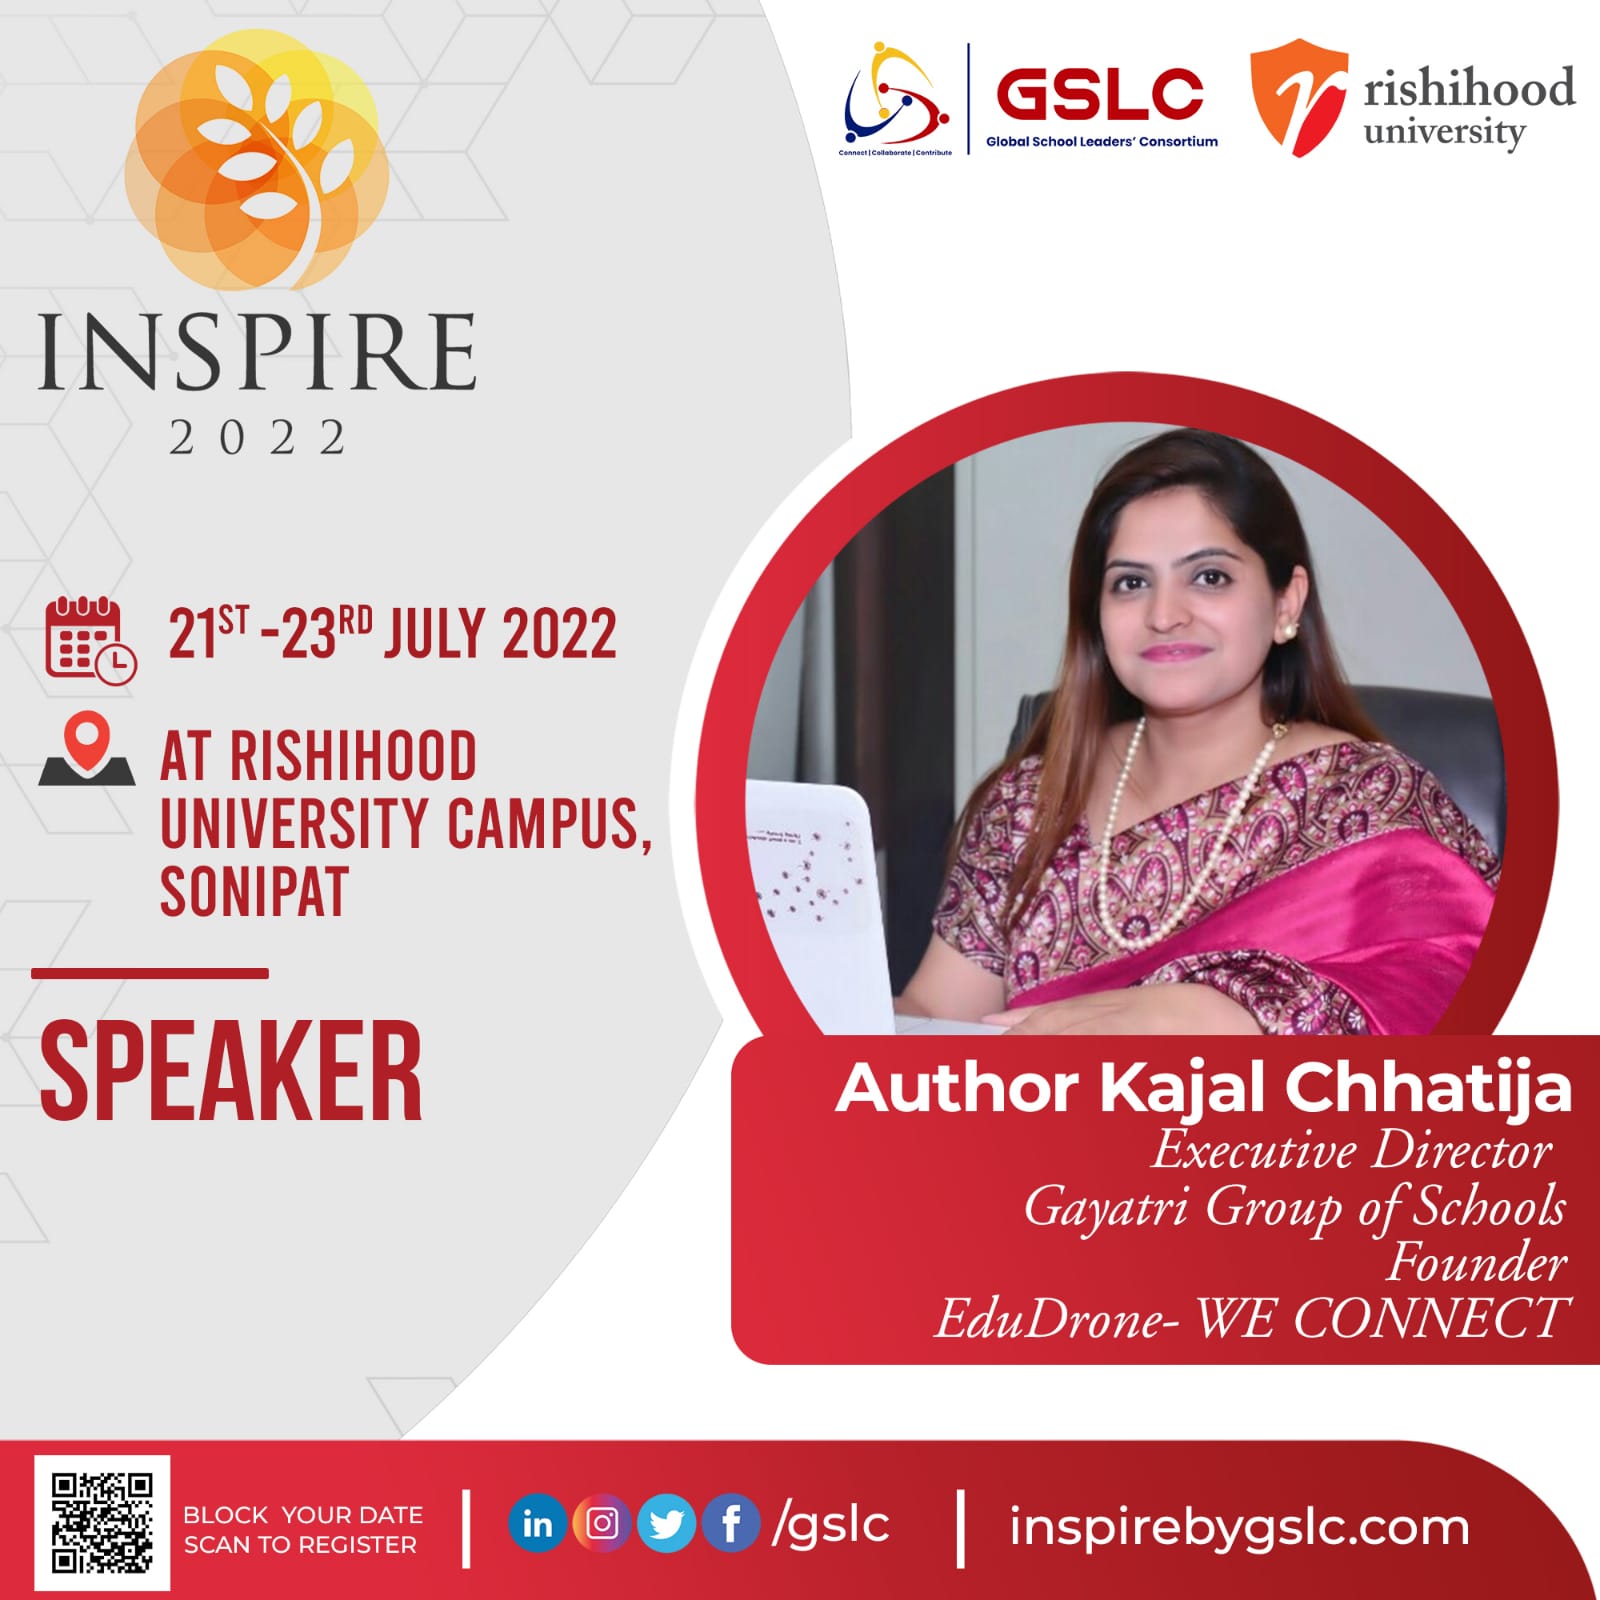 EduDrone We Connect is an outreach partner of GSLC’s International Summit for Planning and Incubating Reforms in Education Awards (INSPIRE 2022) at Rishihood University Campus, Sonipat, Haryana